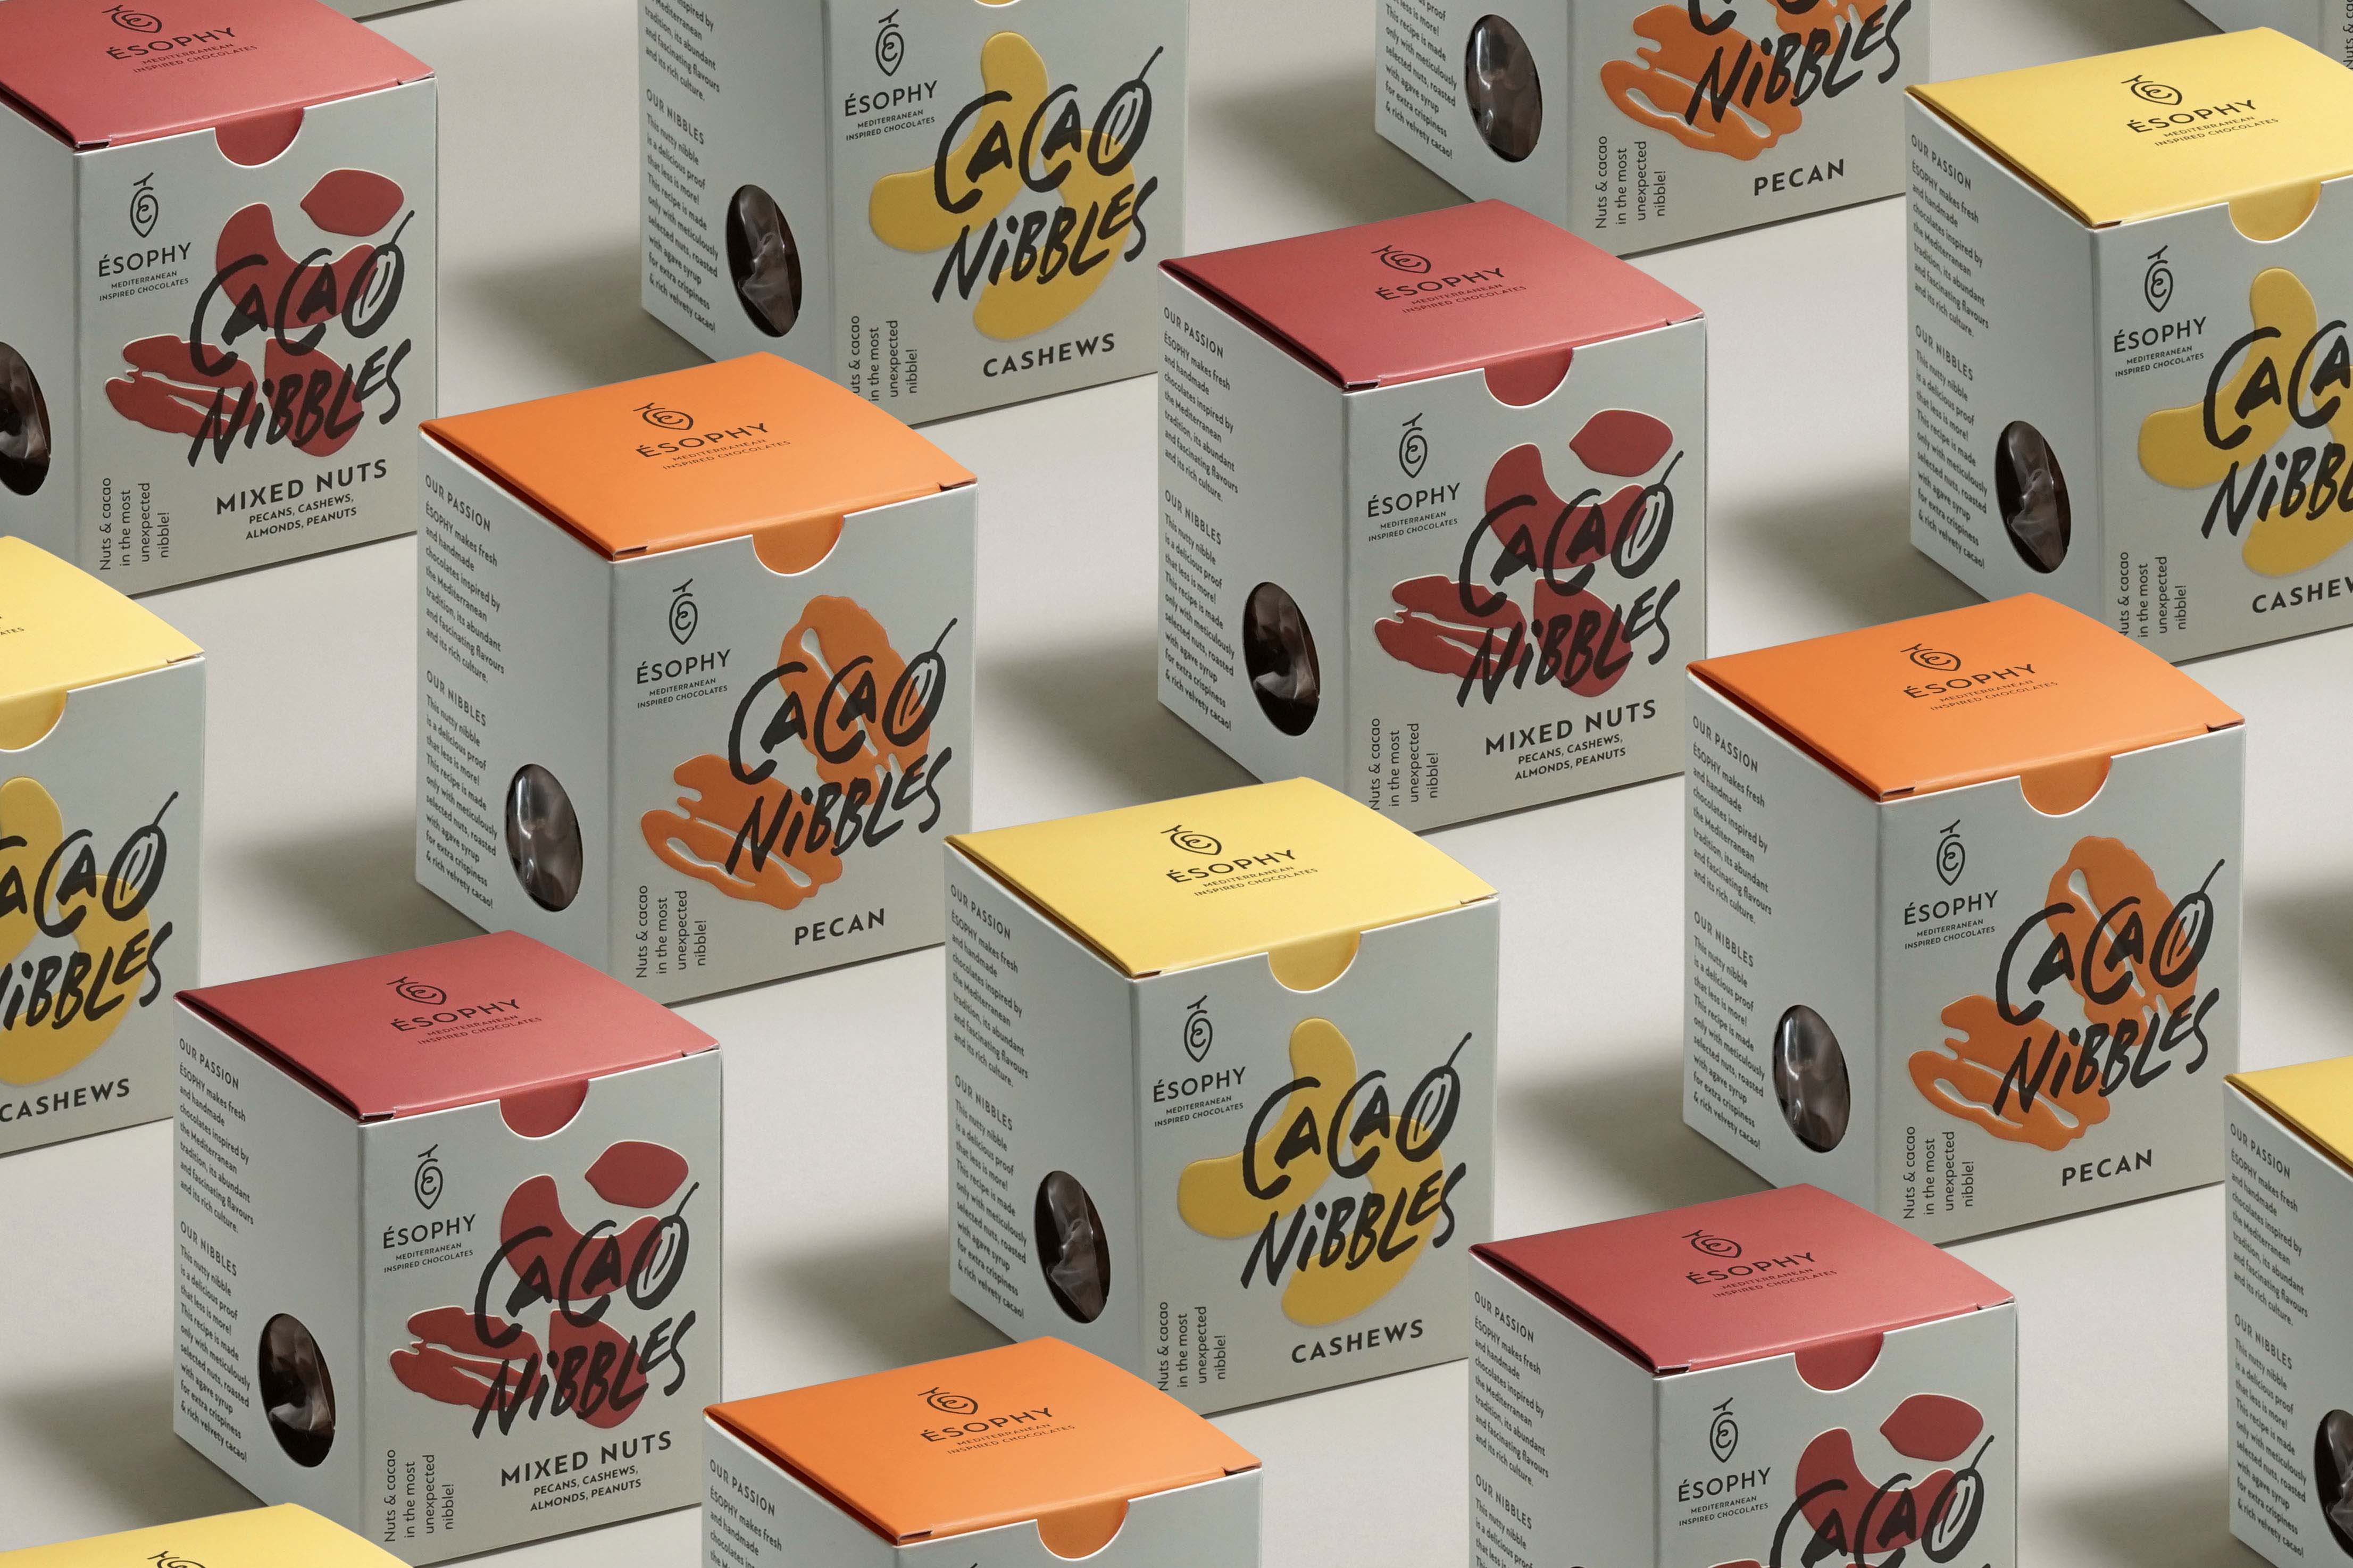 George Probonas Brings a Modern-Pop Aesthetic to Ésophy Cacao Nibbles Packaging Design